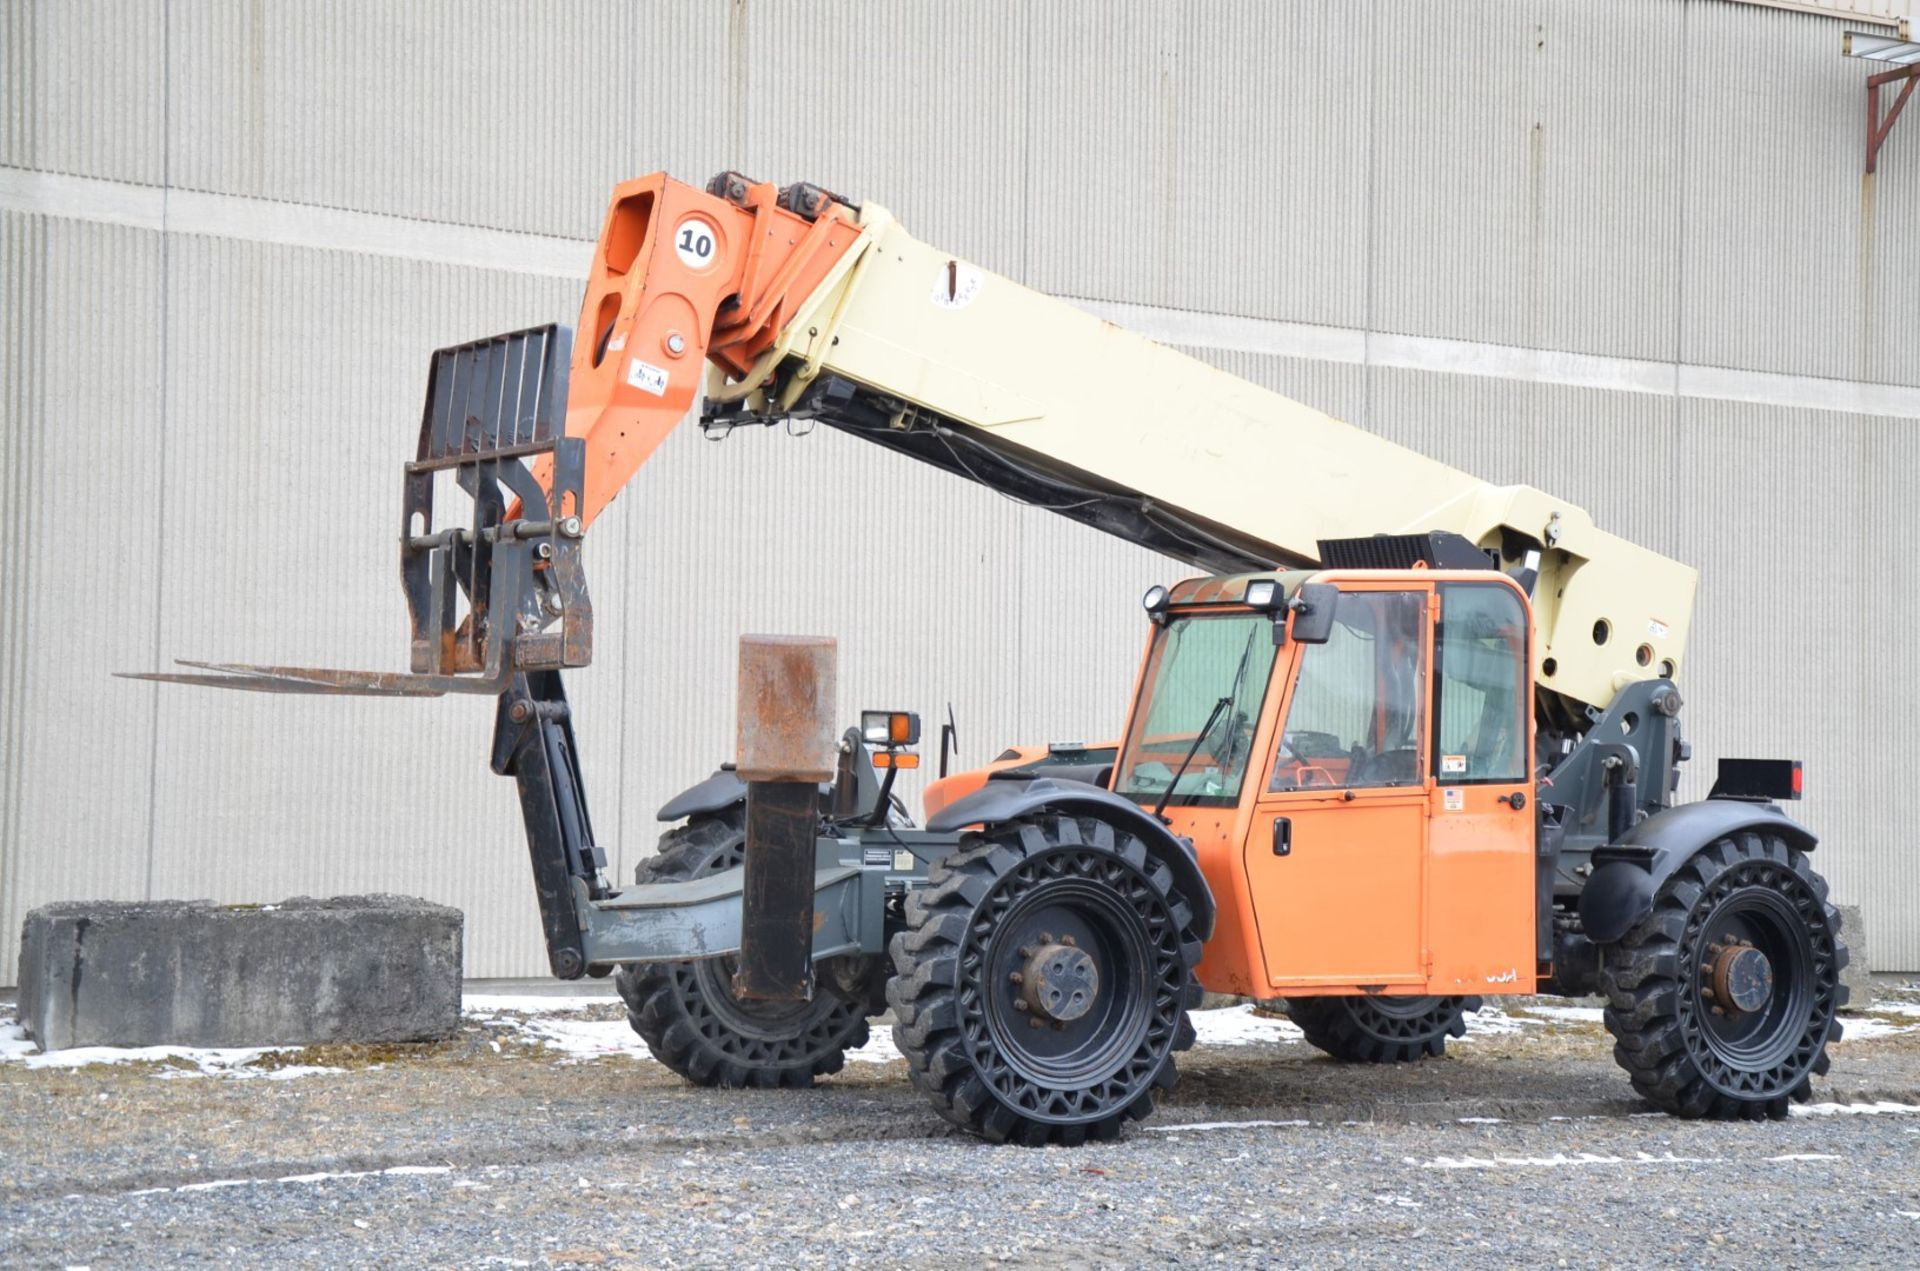 JLG (2011) G10-55A 10,000 LBS. CAPACITY DIESEL TELEHANDLER FORKLIFT WITH 56' MAX VERTICAL LIFT, - Image 3 of 23